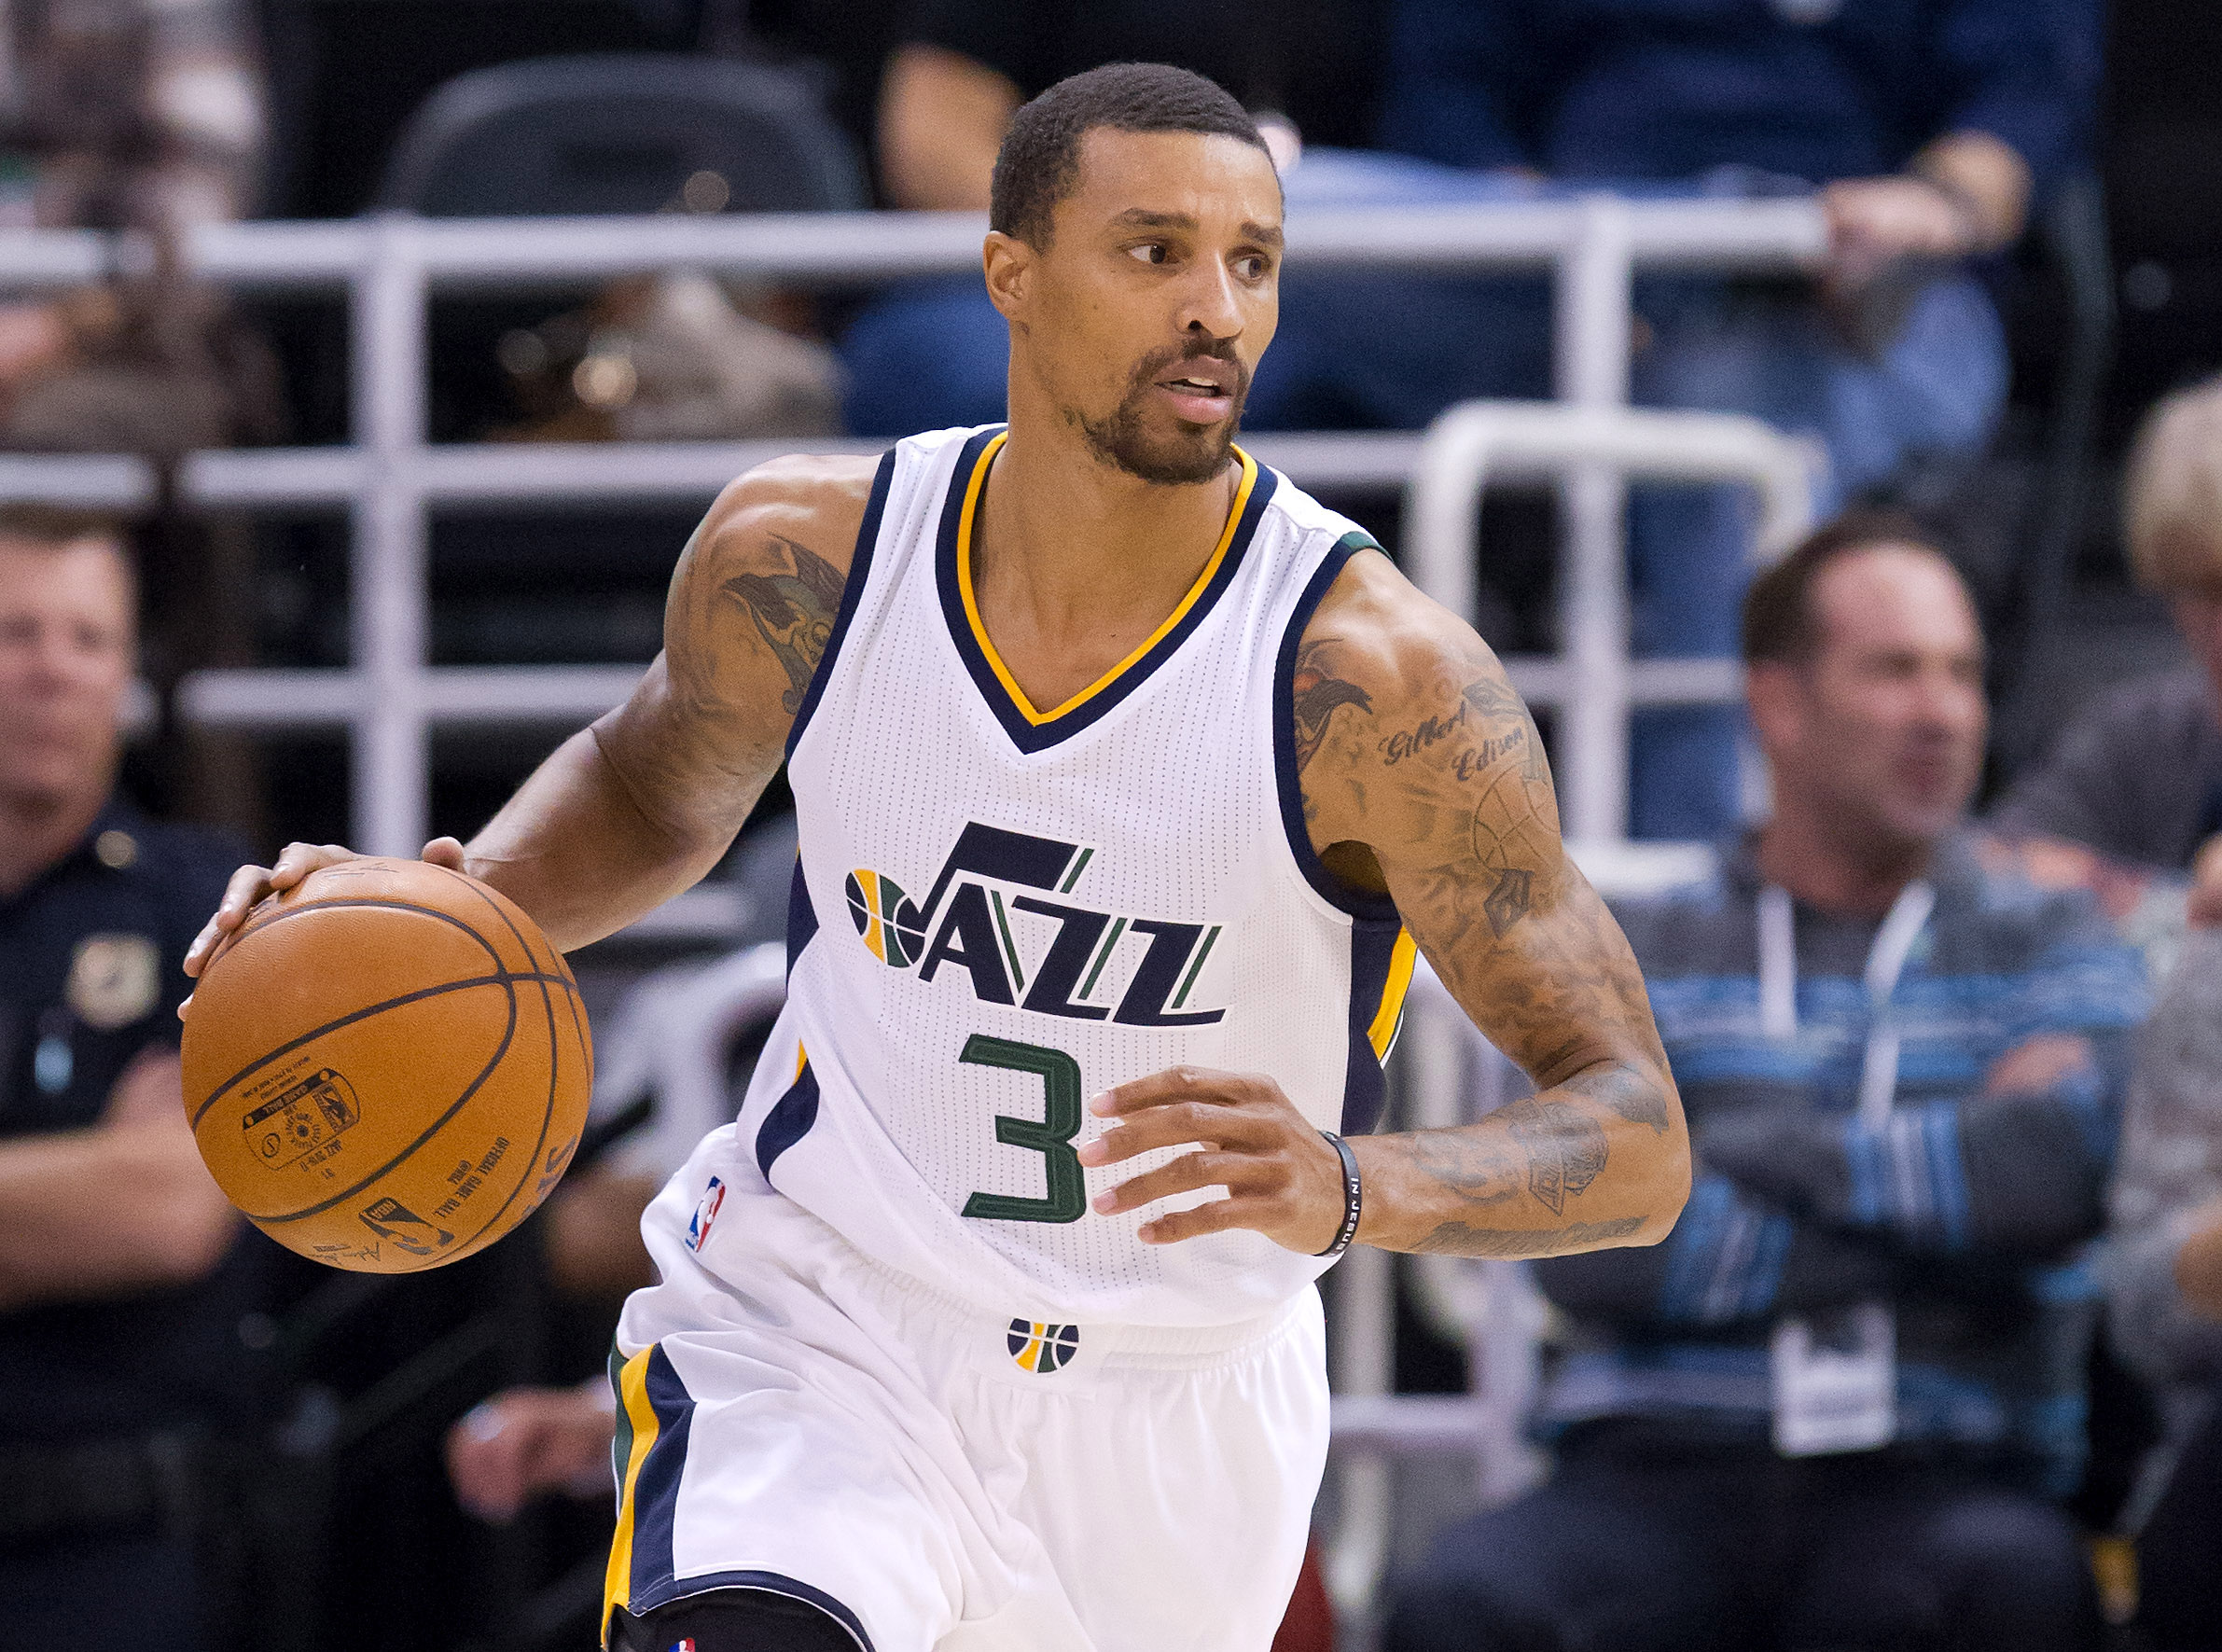 Hill's a good player, but he's not a point guard, which is what the Jazz needed. 